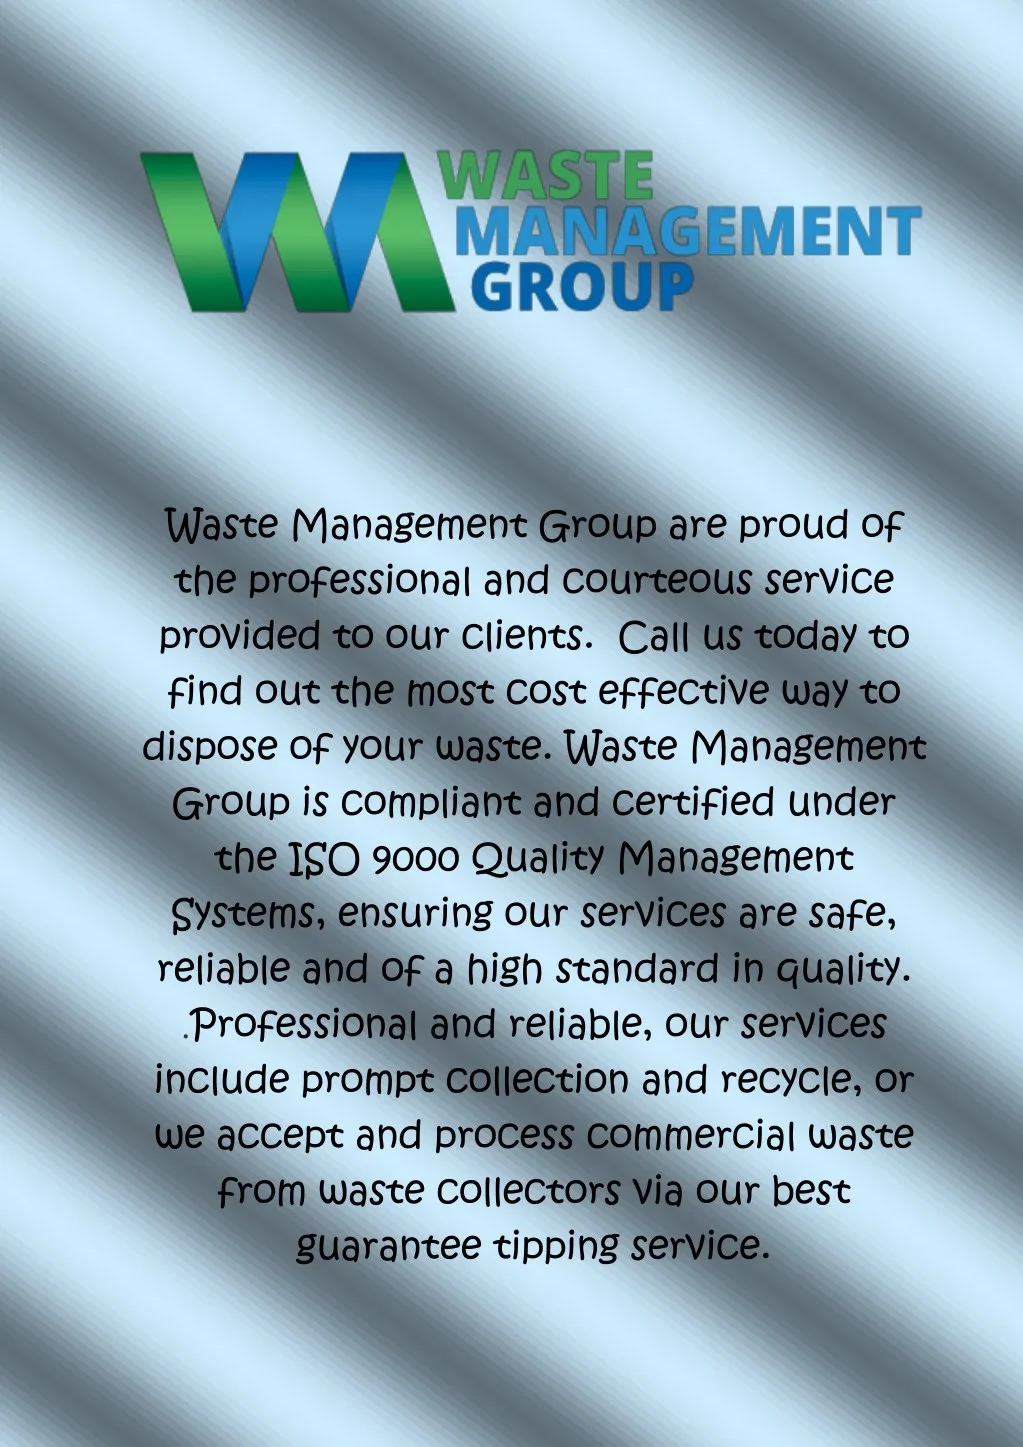 waste management group are proud